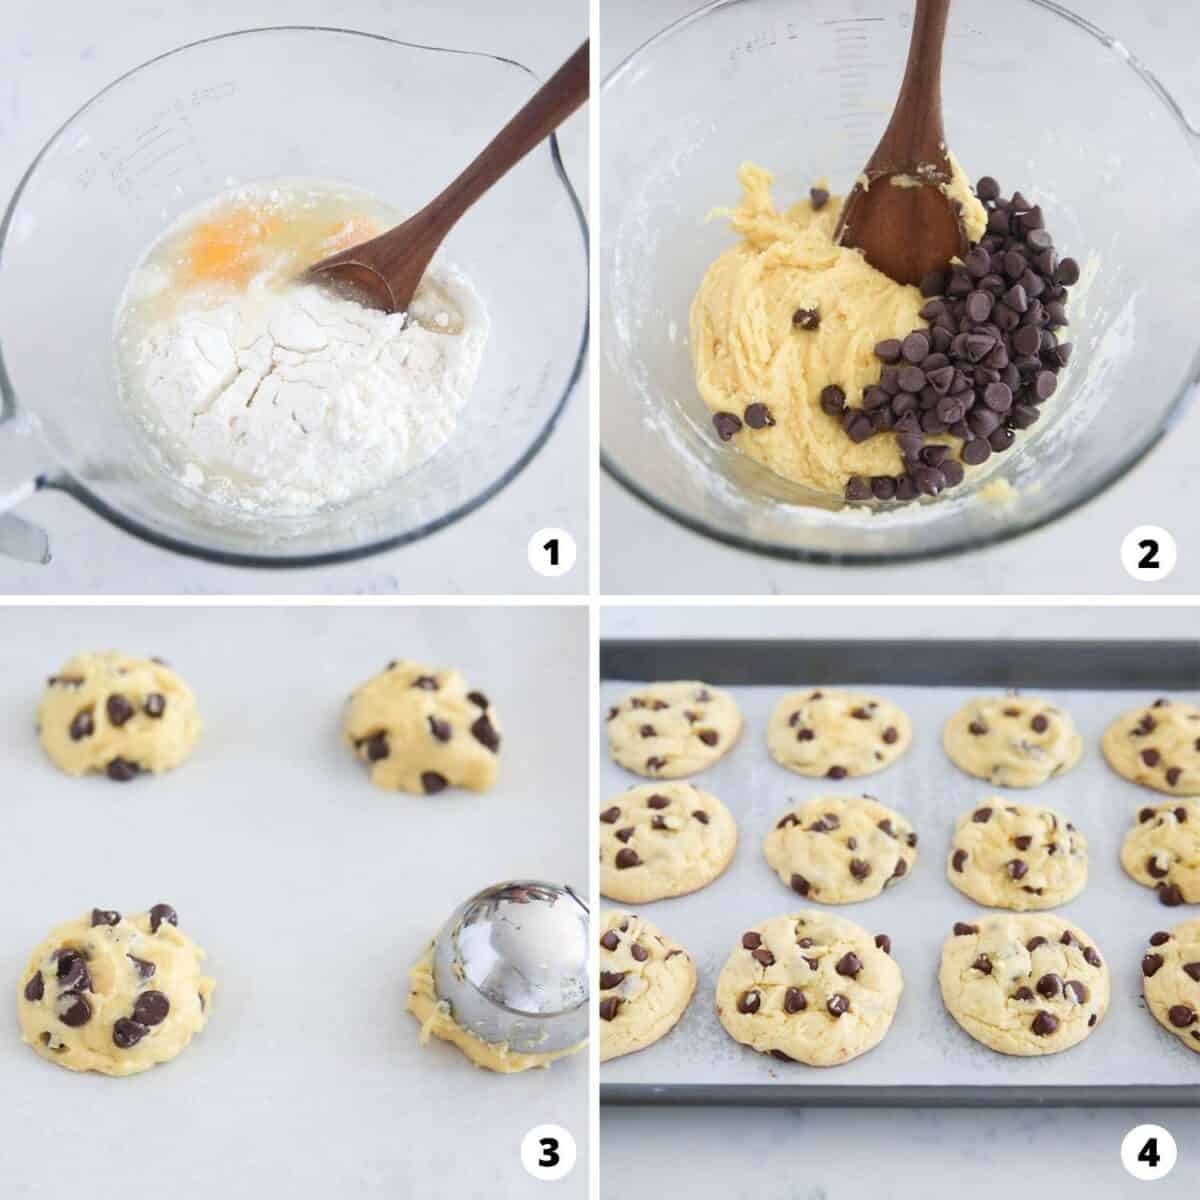 How to make cake mix chocolate chip cookie collage.